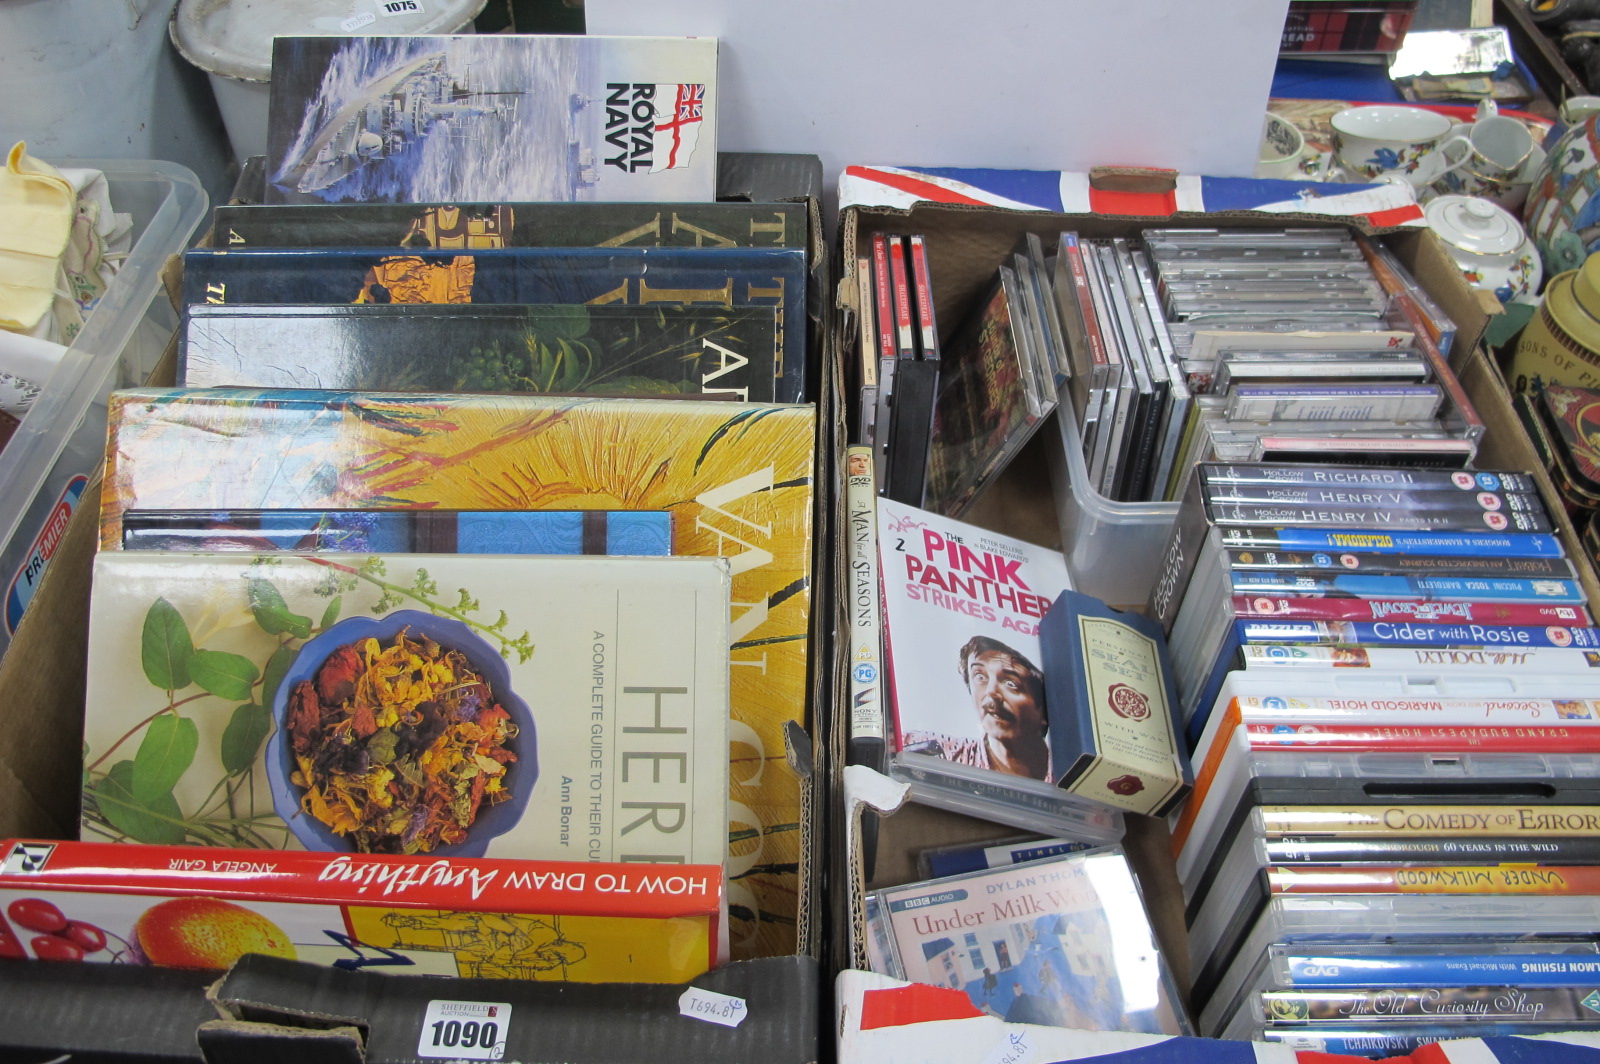 DVD's 'Marigold Hotel, boxed set of The Hollow Crowns, classical cd's, art books on Van Gogh etc:-